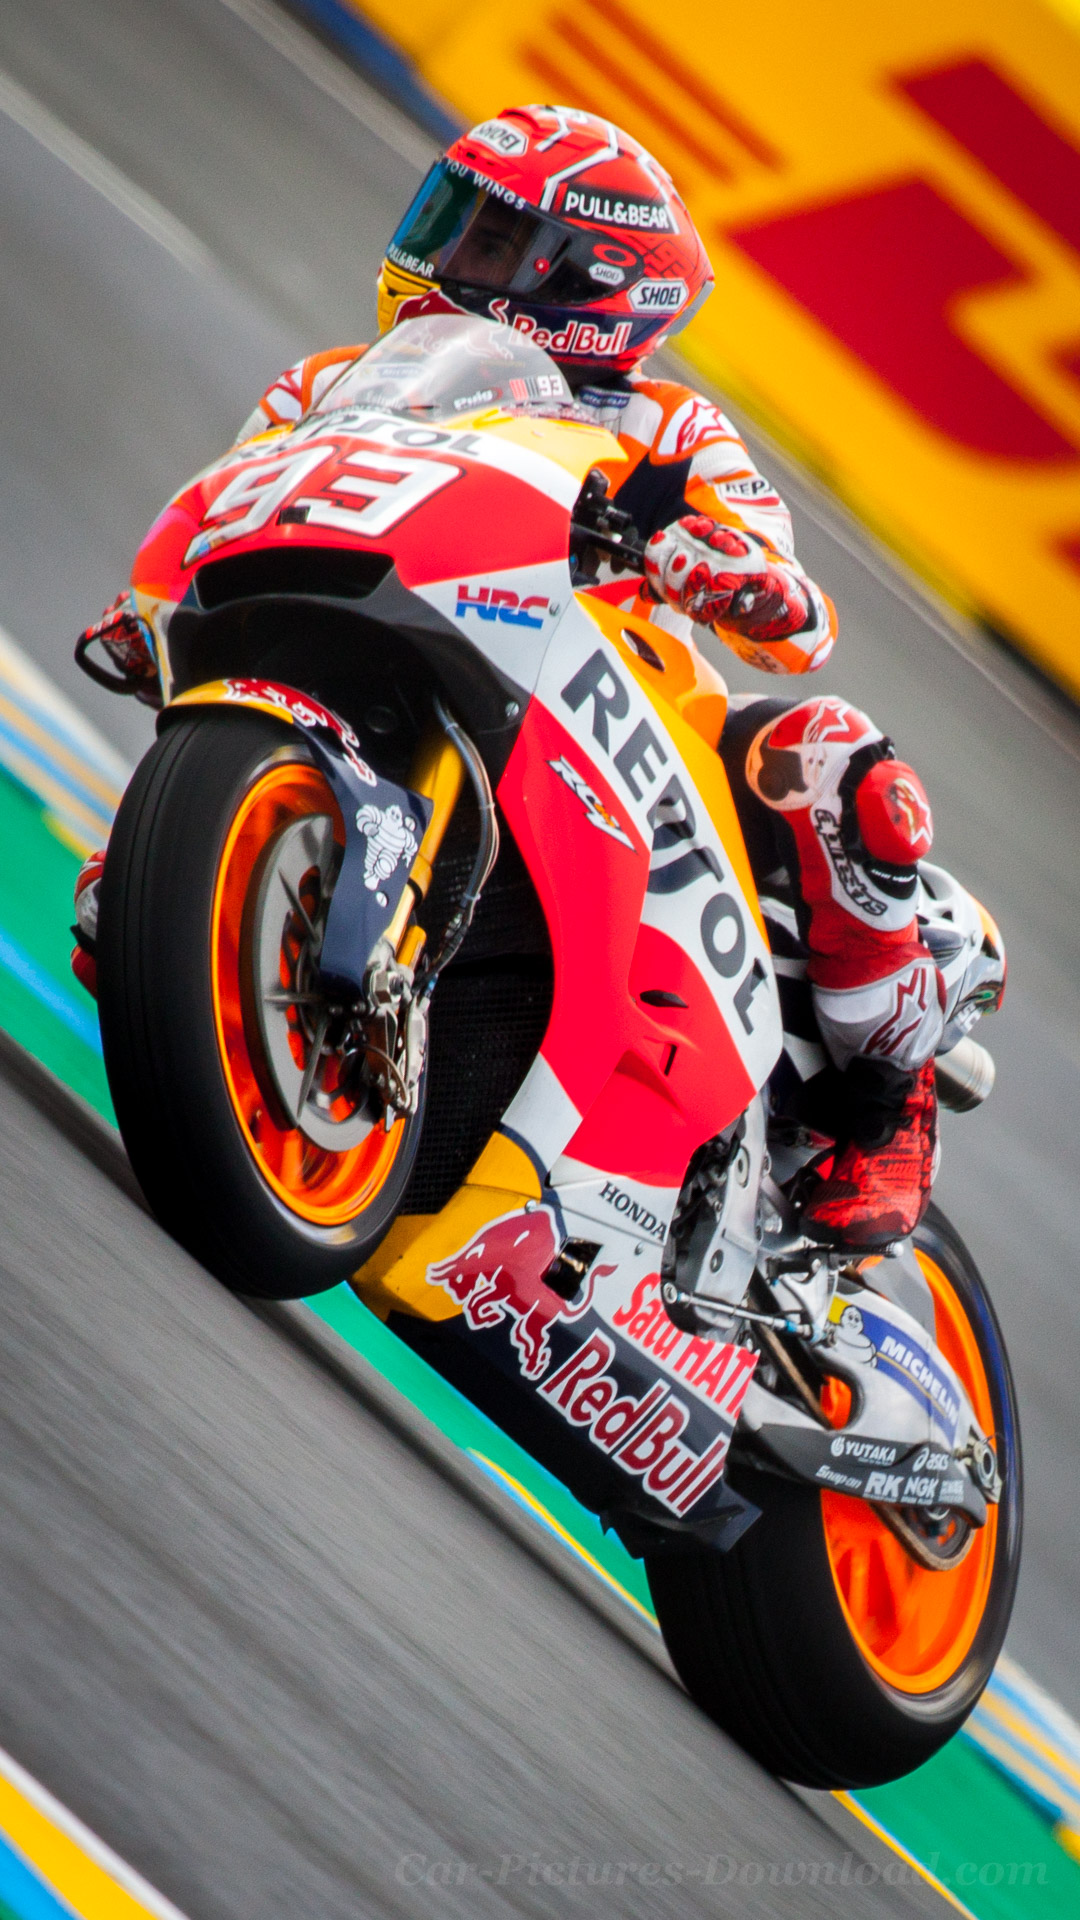 Motogp Wallpaper, Sports Motogp 768x1024 Wallpaper Id 717871 Mobile Abyss, Subscribe to our weekly wallpaper newsletter and receive the week's most downloaded suzuki racing